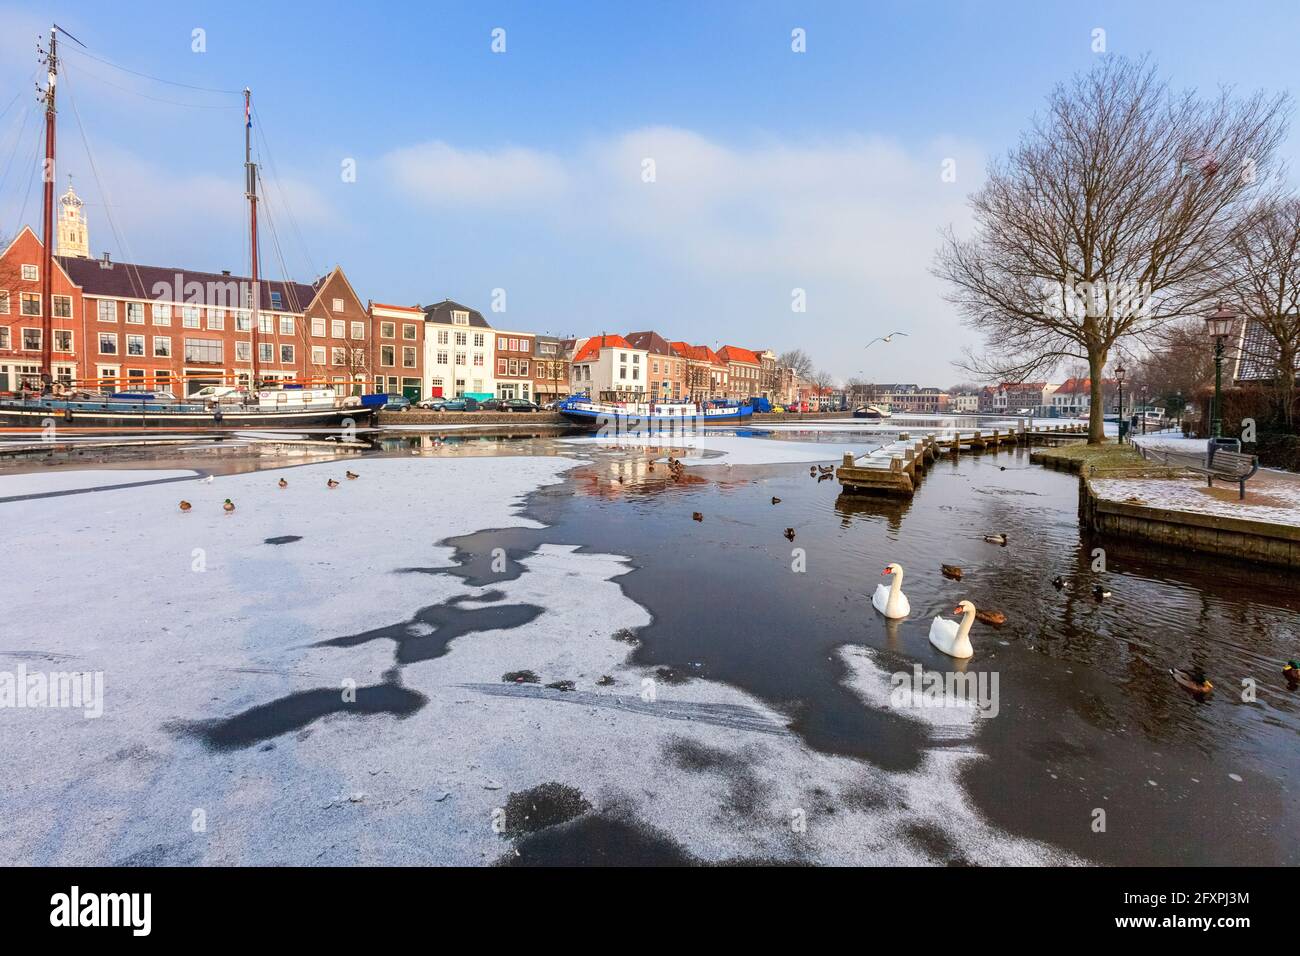 White swans in the frozen water of Spaarne river canal, Haarlem, Amsterdam district, North Holland, The Netherlands, Europe Stock Photo